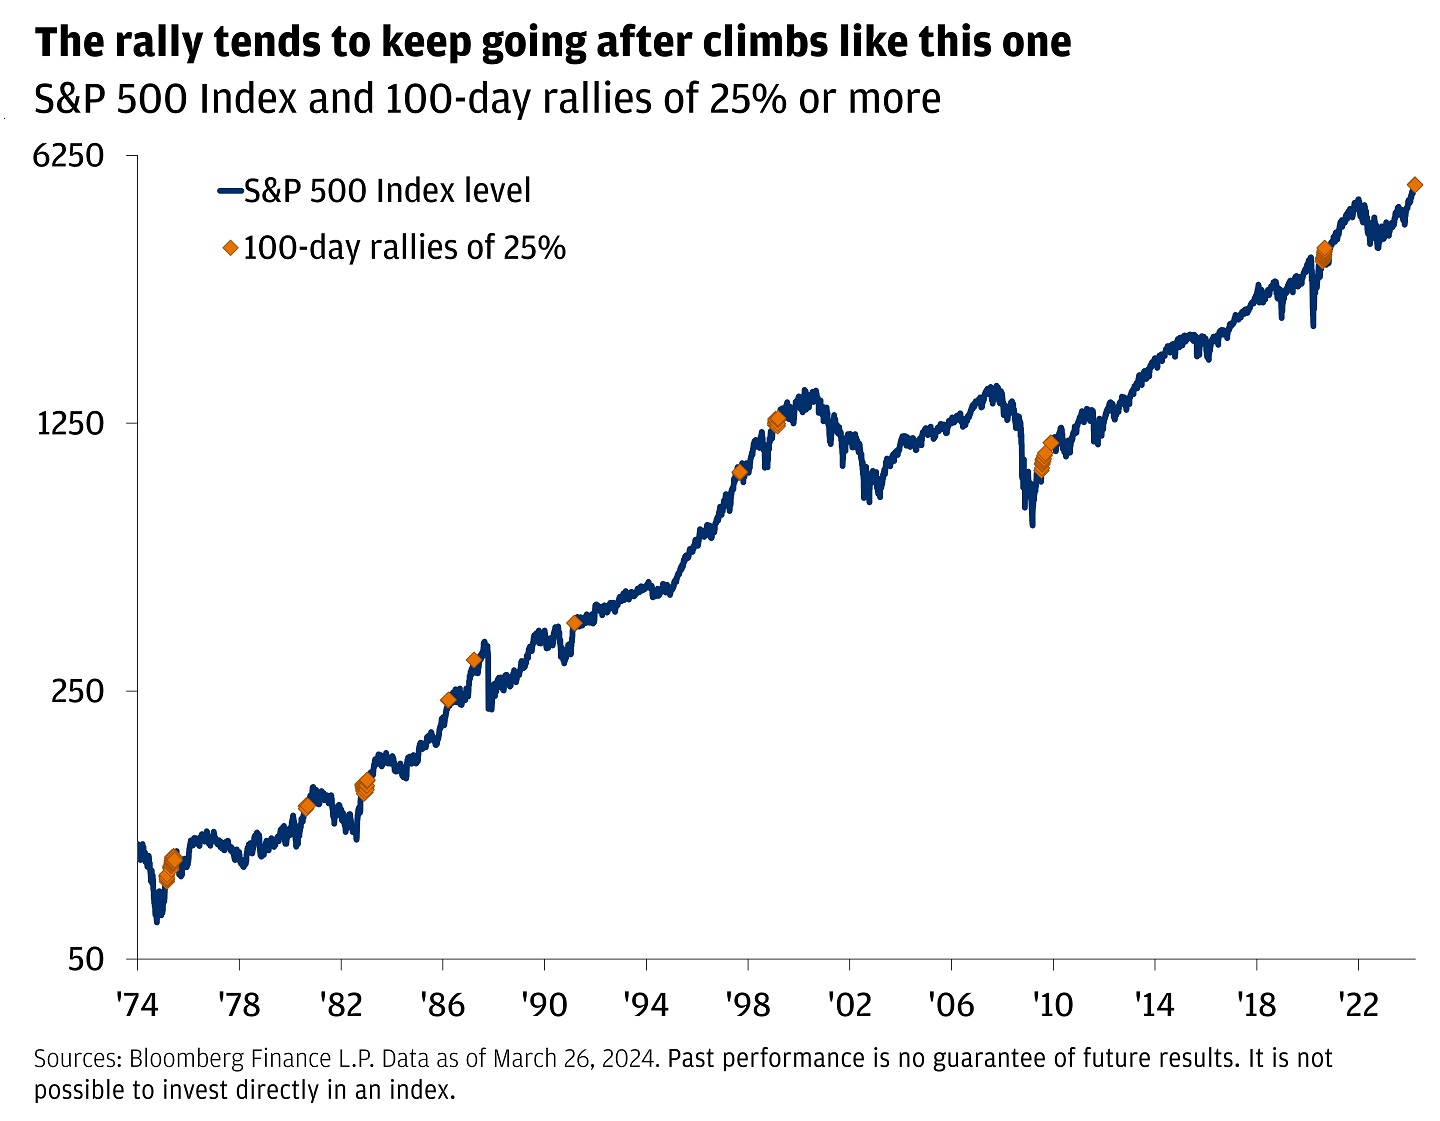 This line graph shows the price of the S&P 500 index and 100-day periods over which stocks rallied 25% or more. 